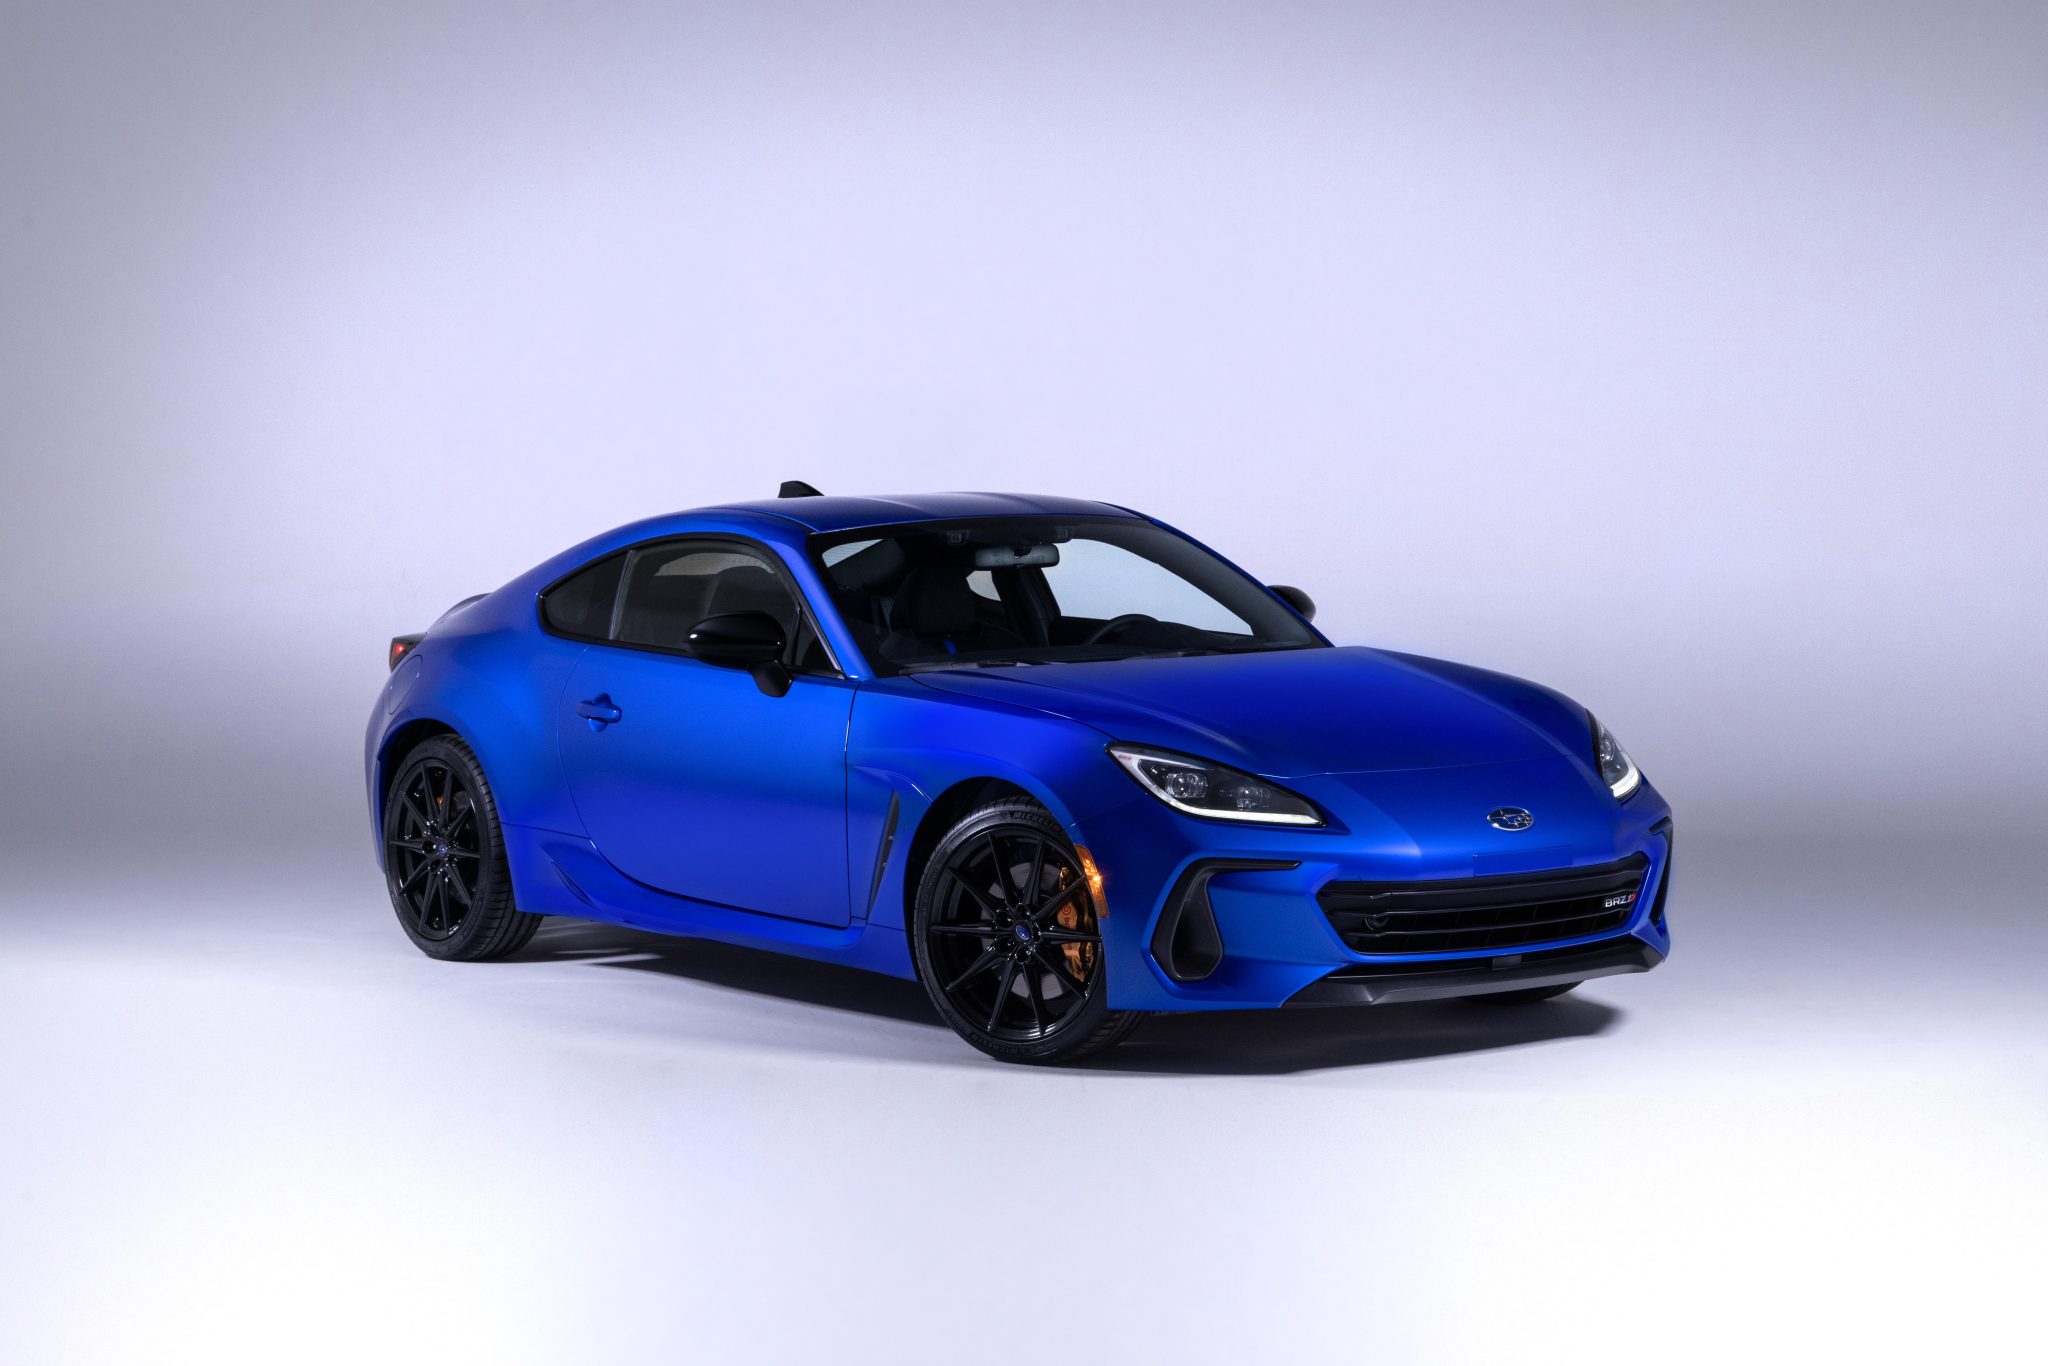 Subaru's newest sports car features more reserved styling and no production limit, unlike the previous generation.